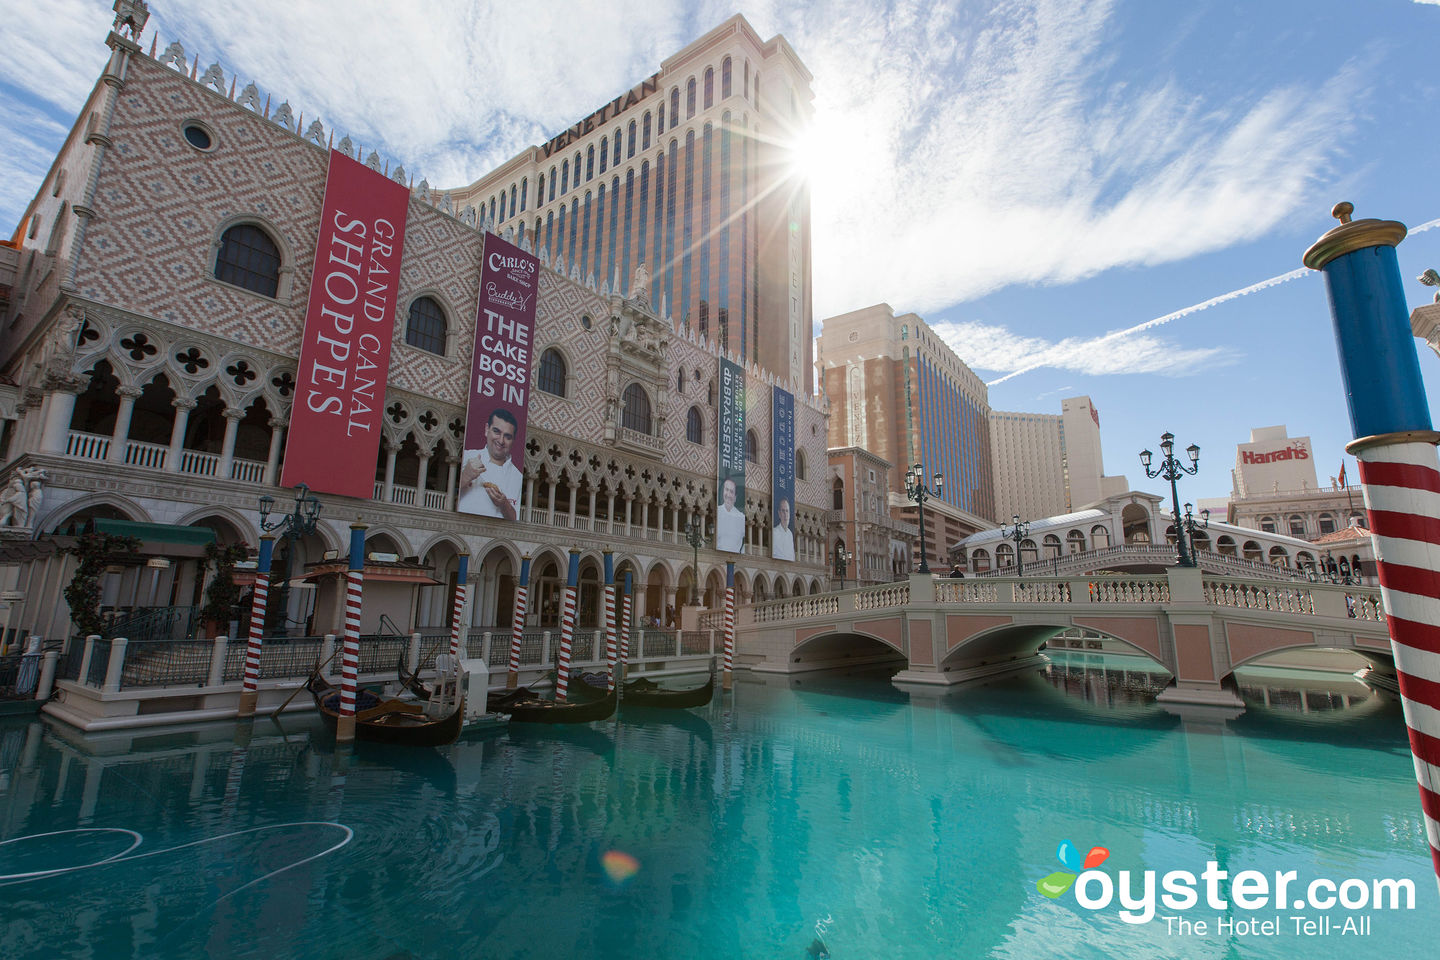 Satisfied shoppingThe Grand Canal Shoppes at The Venetian Resort - All ...